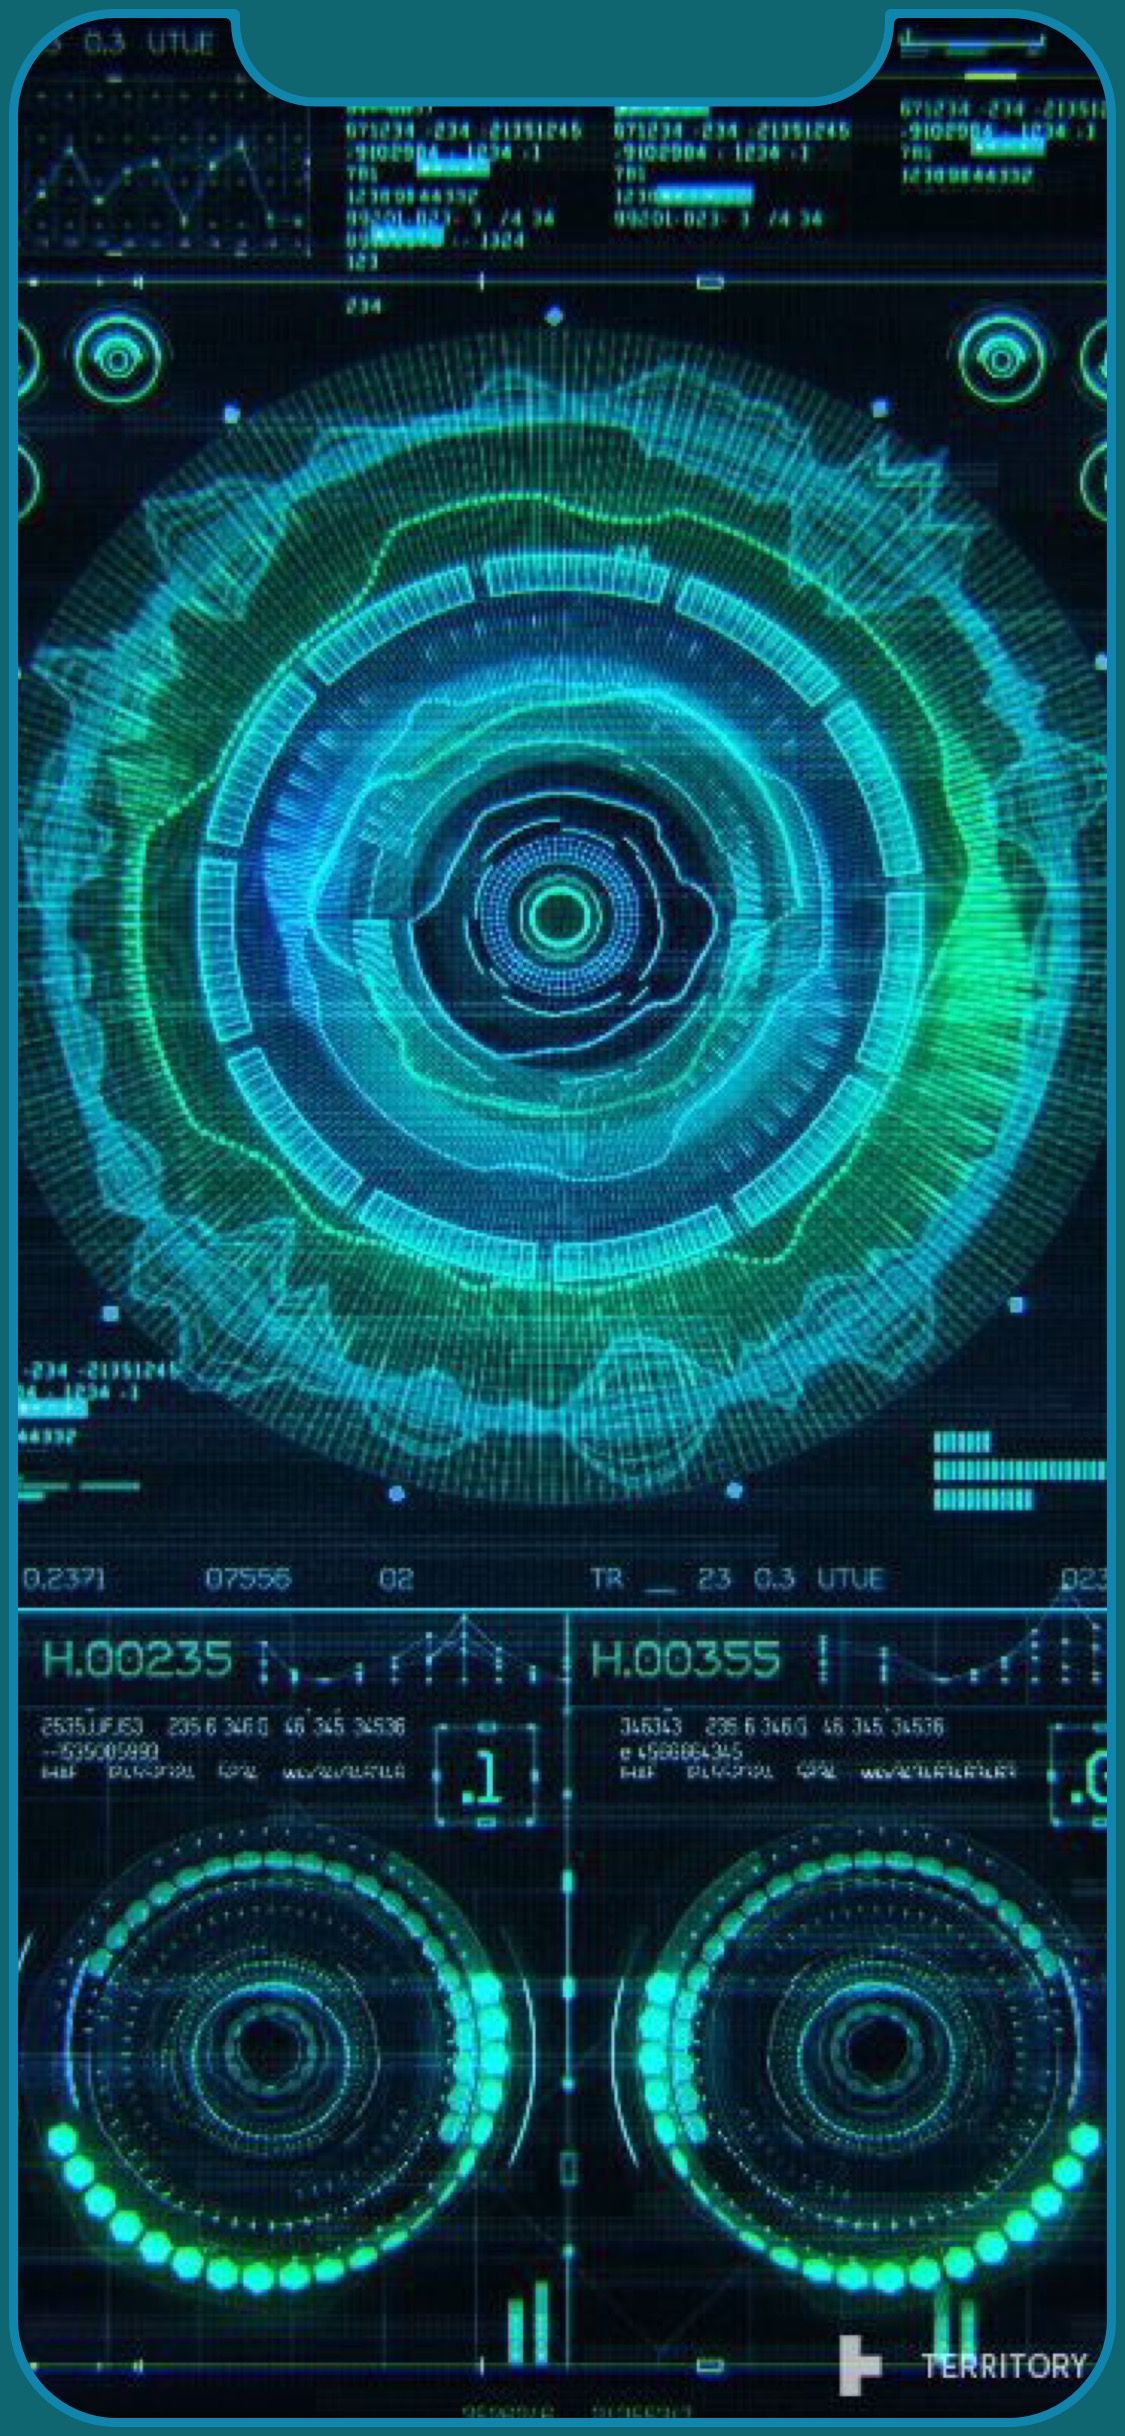 Sci Fi Iphone Wallpapers